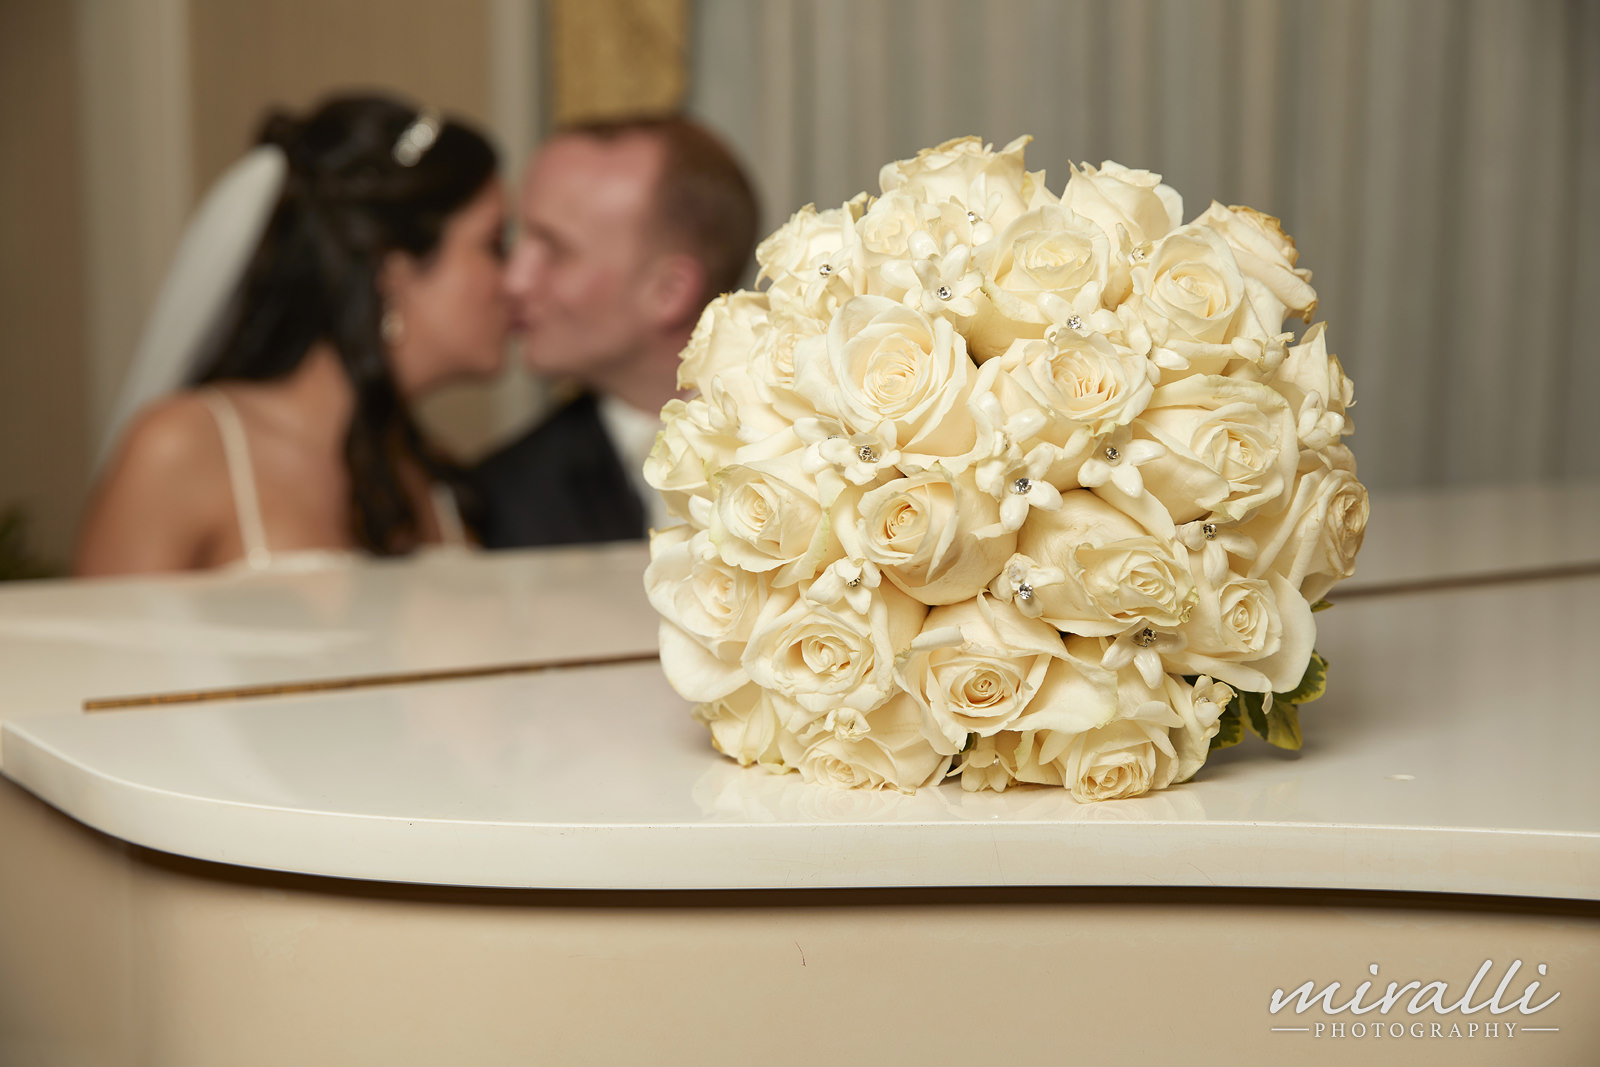 Floral Terrace Wedding Photos by Miralli Photography